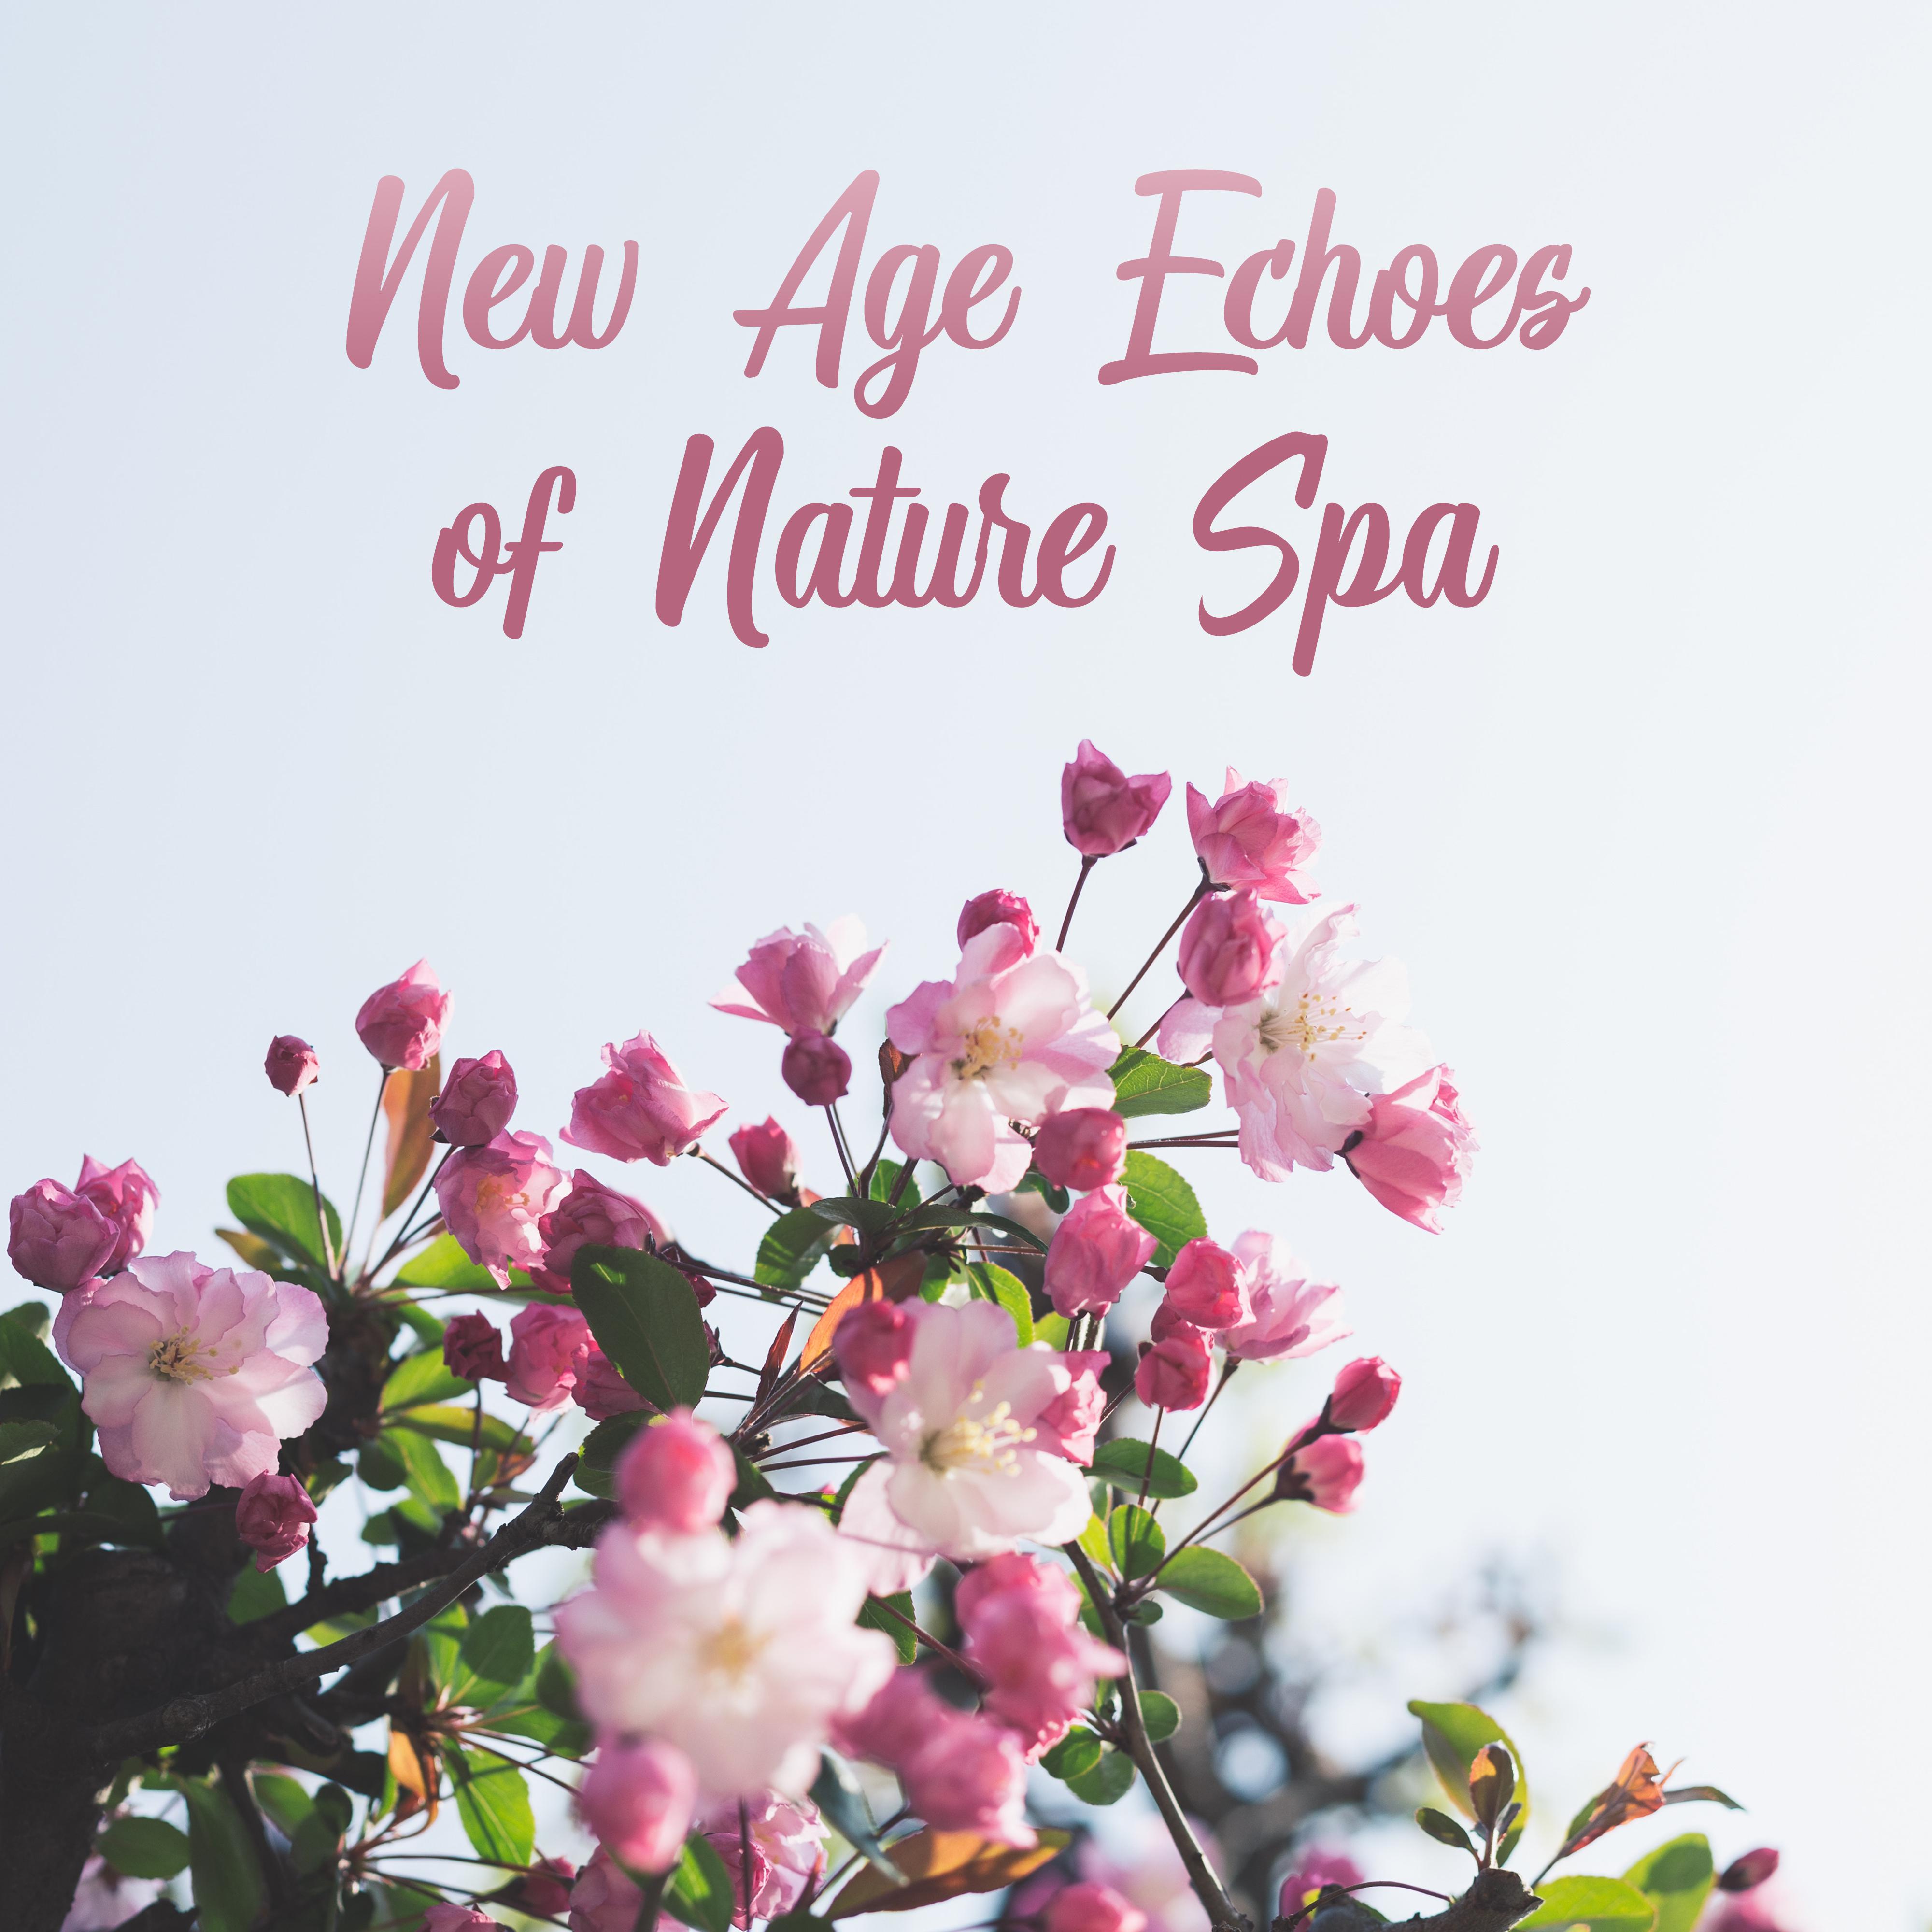 New Age Echoes of Nature Spa: 2019 Soft Music for Wellness, Hot Baths, Sauna & Massage Therapy